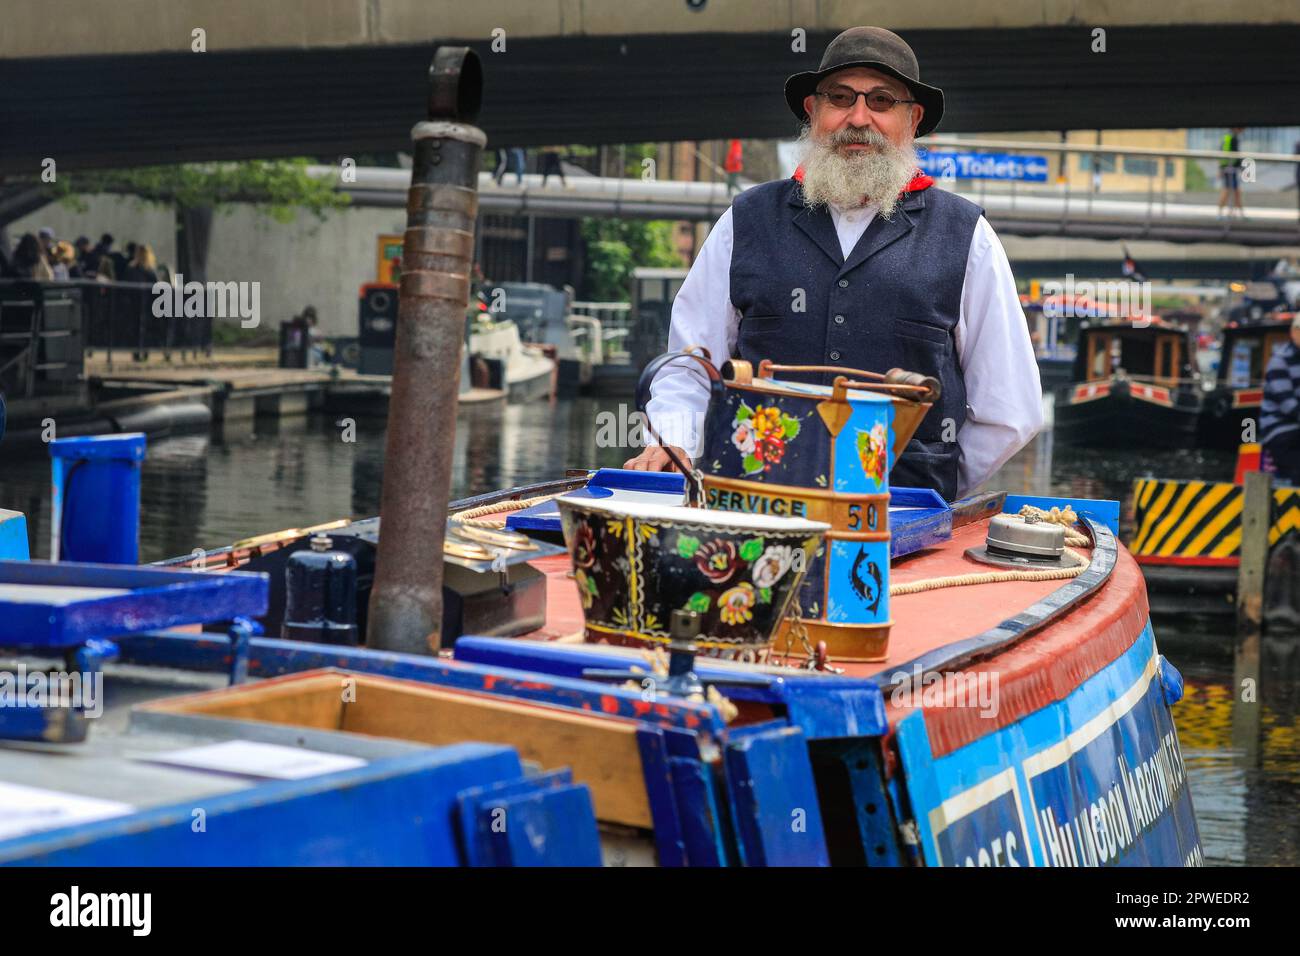 London, UK, 30th April 2023. Peter, a volunteer on the "Pisces" dressed up in a traditional boating outfit, represents the Hillingdon Narrowboat Association, a charity that takes disadvantages people on boat trips. Narrowboats, barges and canal boats once again take part in the IWA Canalway Cavalcade festival in Little Venice Organised by the Inland Waterways Association (IWA), IWA Canalway Cavalcade has its 40th anniversary this year, celebrating boat life on the waterways with a boat pageant, music, stalls and family entertainment along the Grand Union Canal. Stock Photo